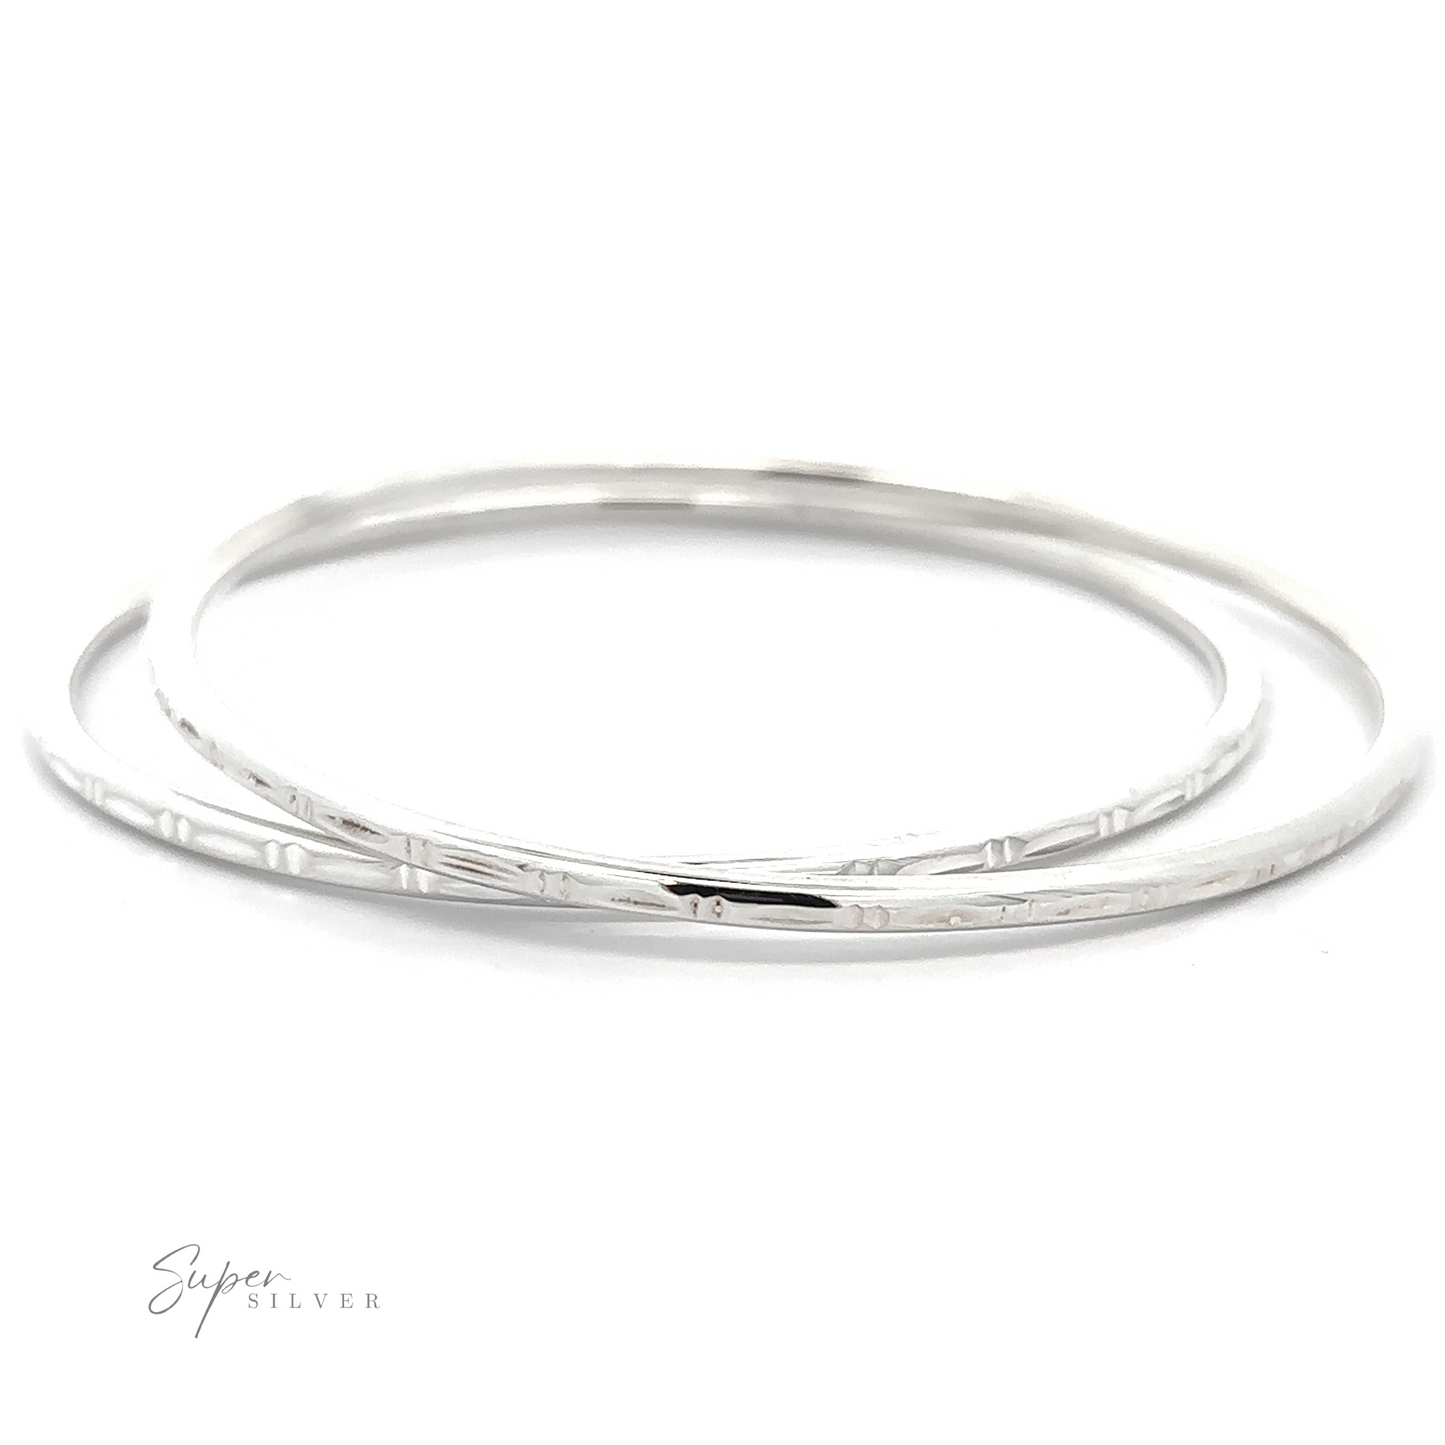 Two Silver Bangle Bracelets with Faceted Cut on a white background with a bamboo facet cut design.